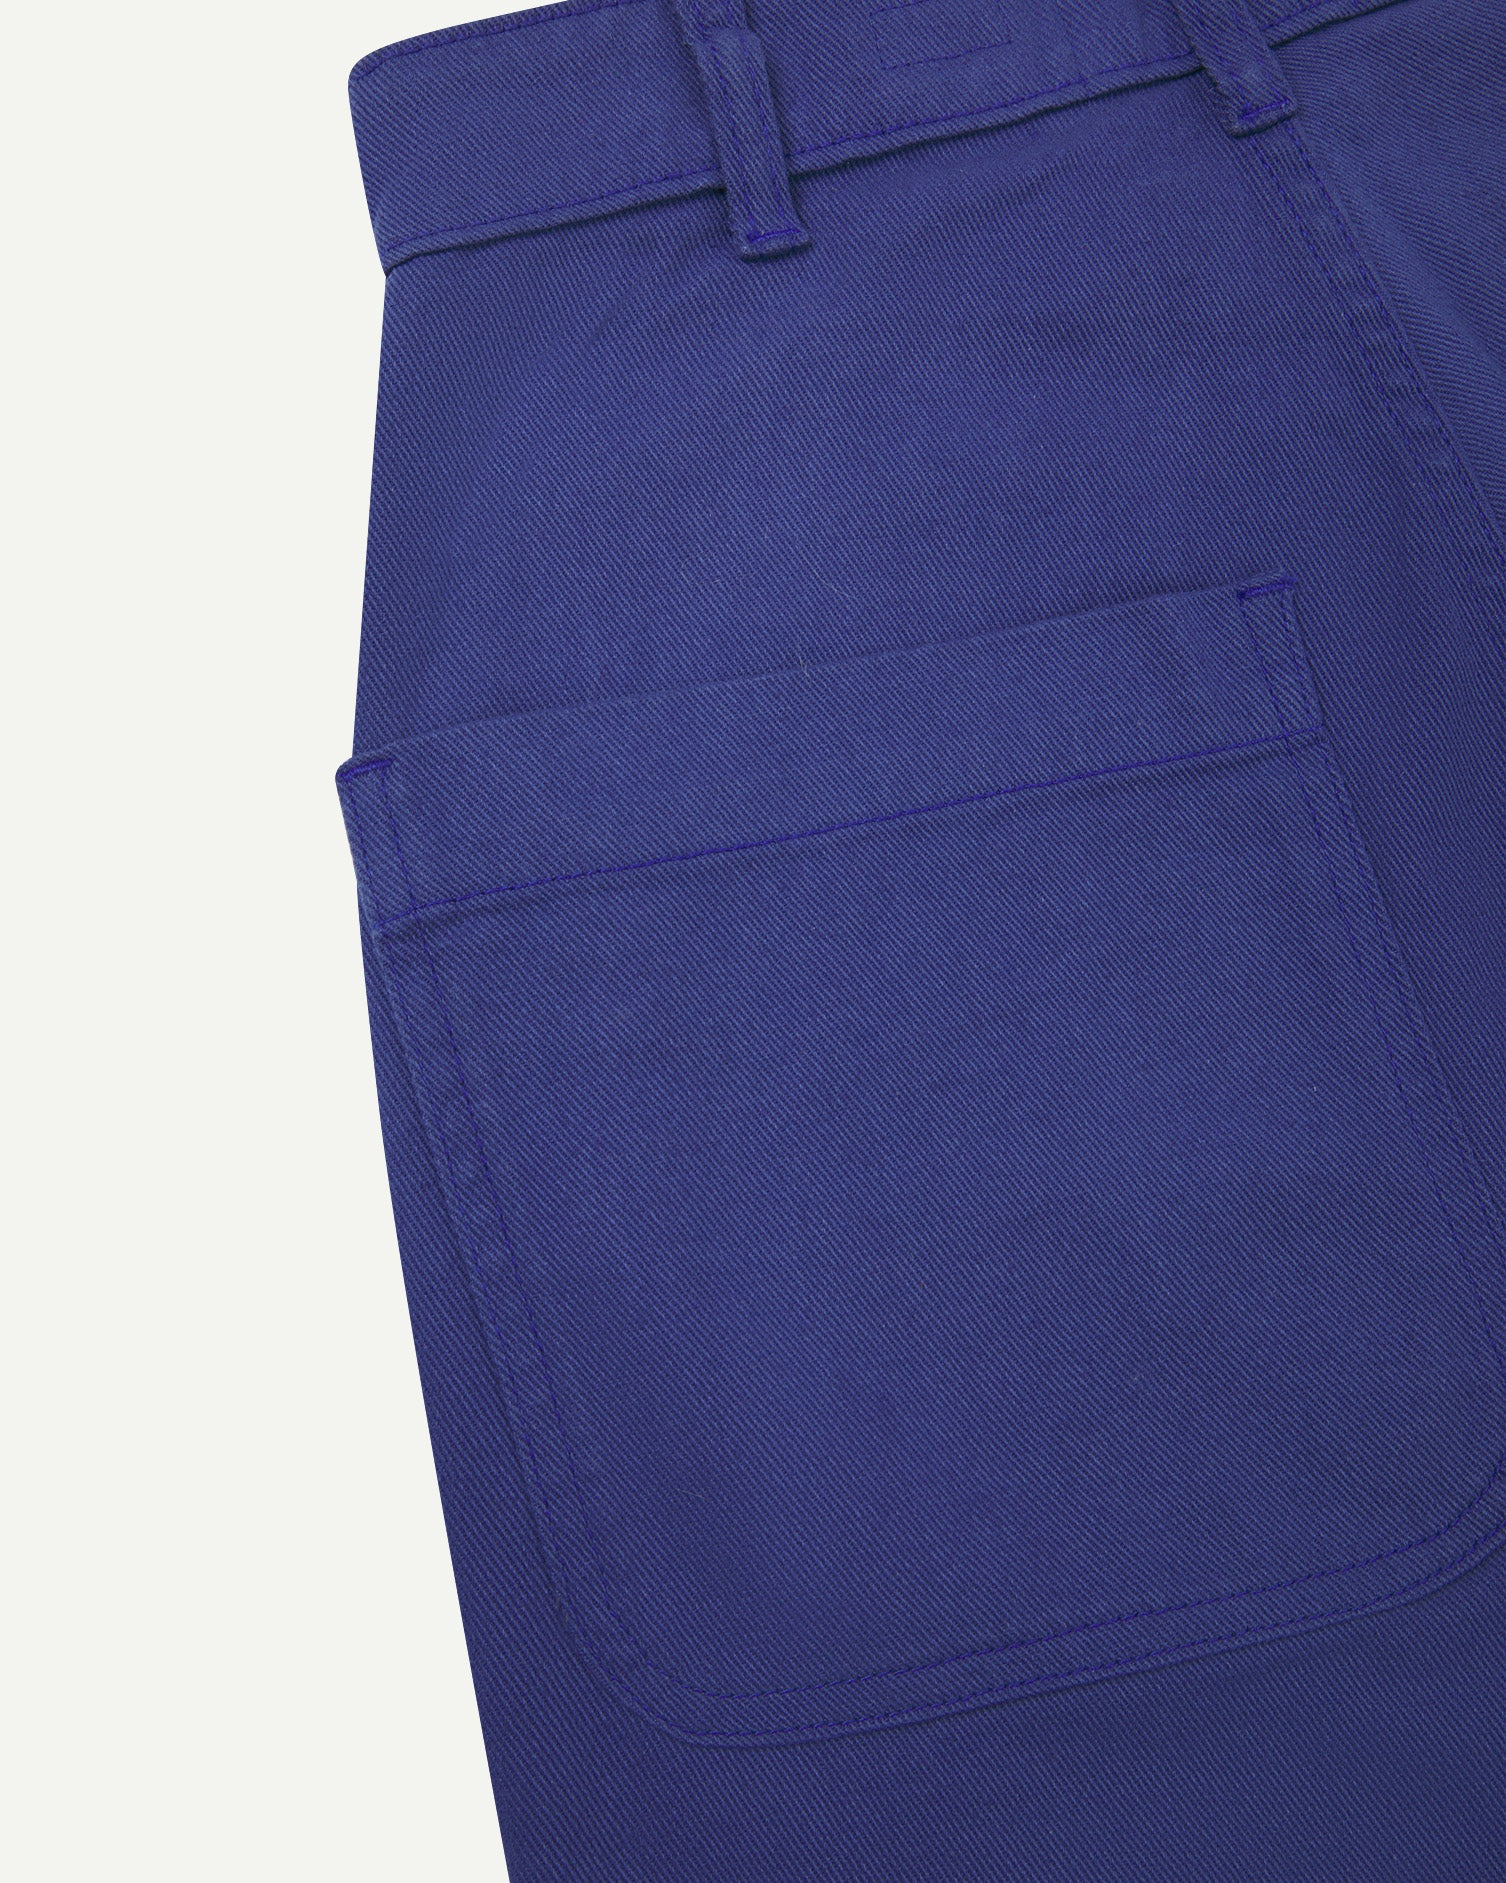 Back close-up view of Uskees cotton drill 'commuter' trousers for men in ultra blue showing belt loops and back pocket.